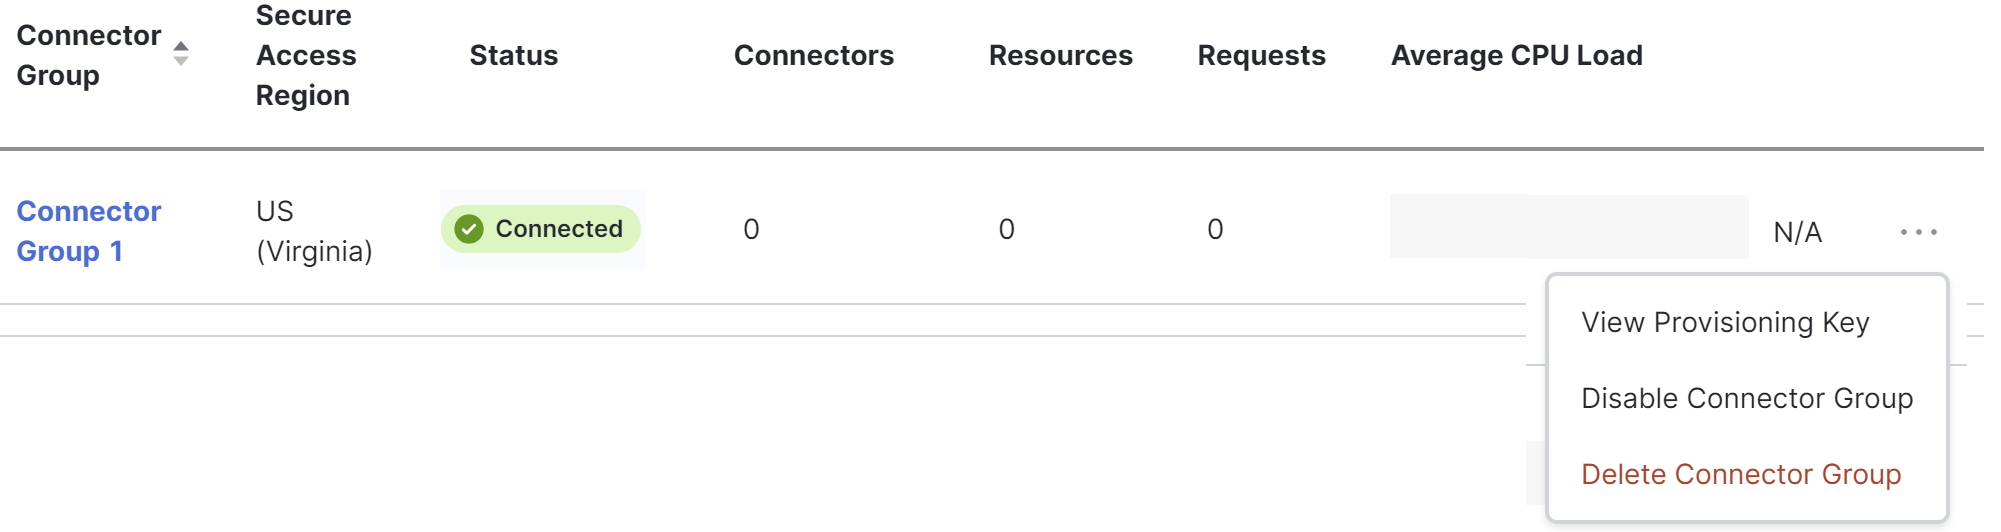 Disable or delete a resource connector group